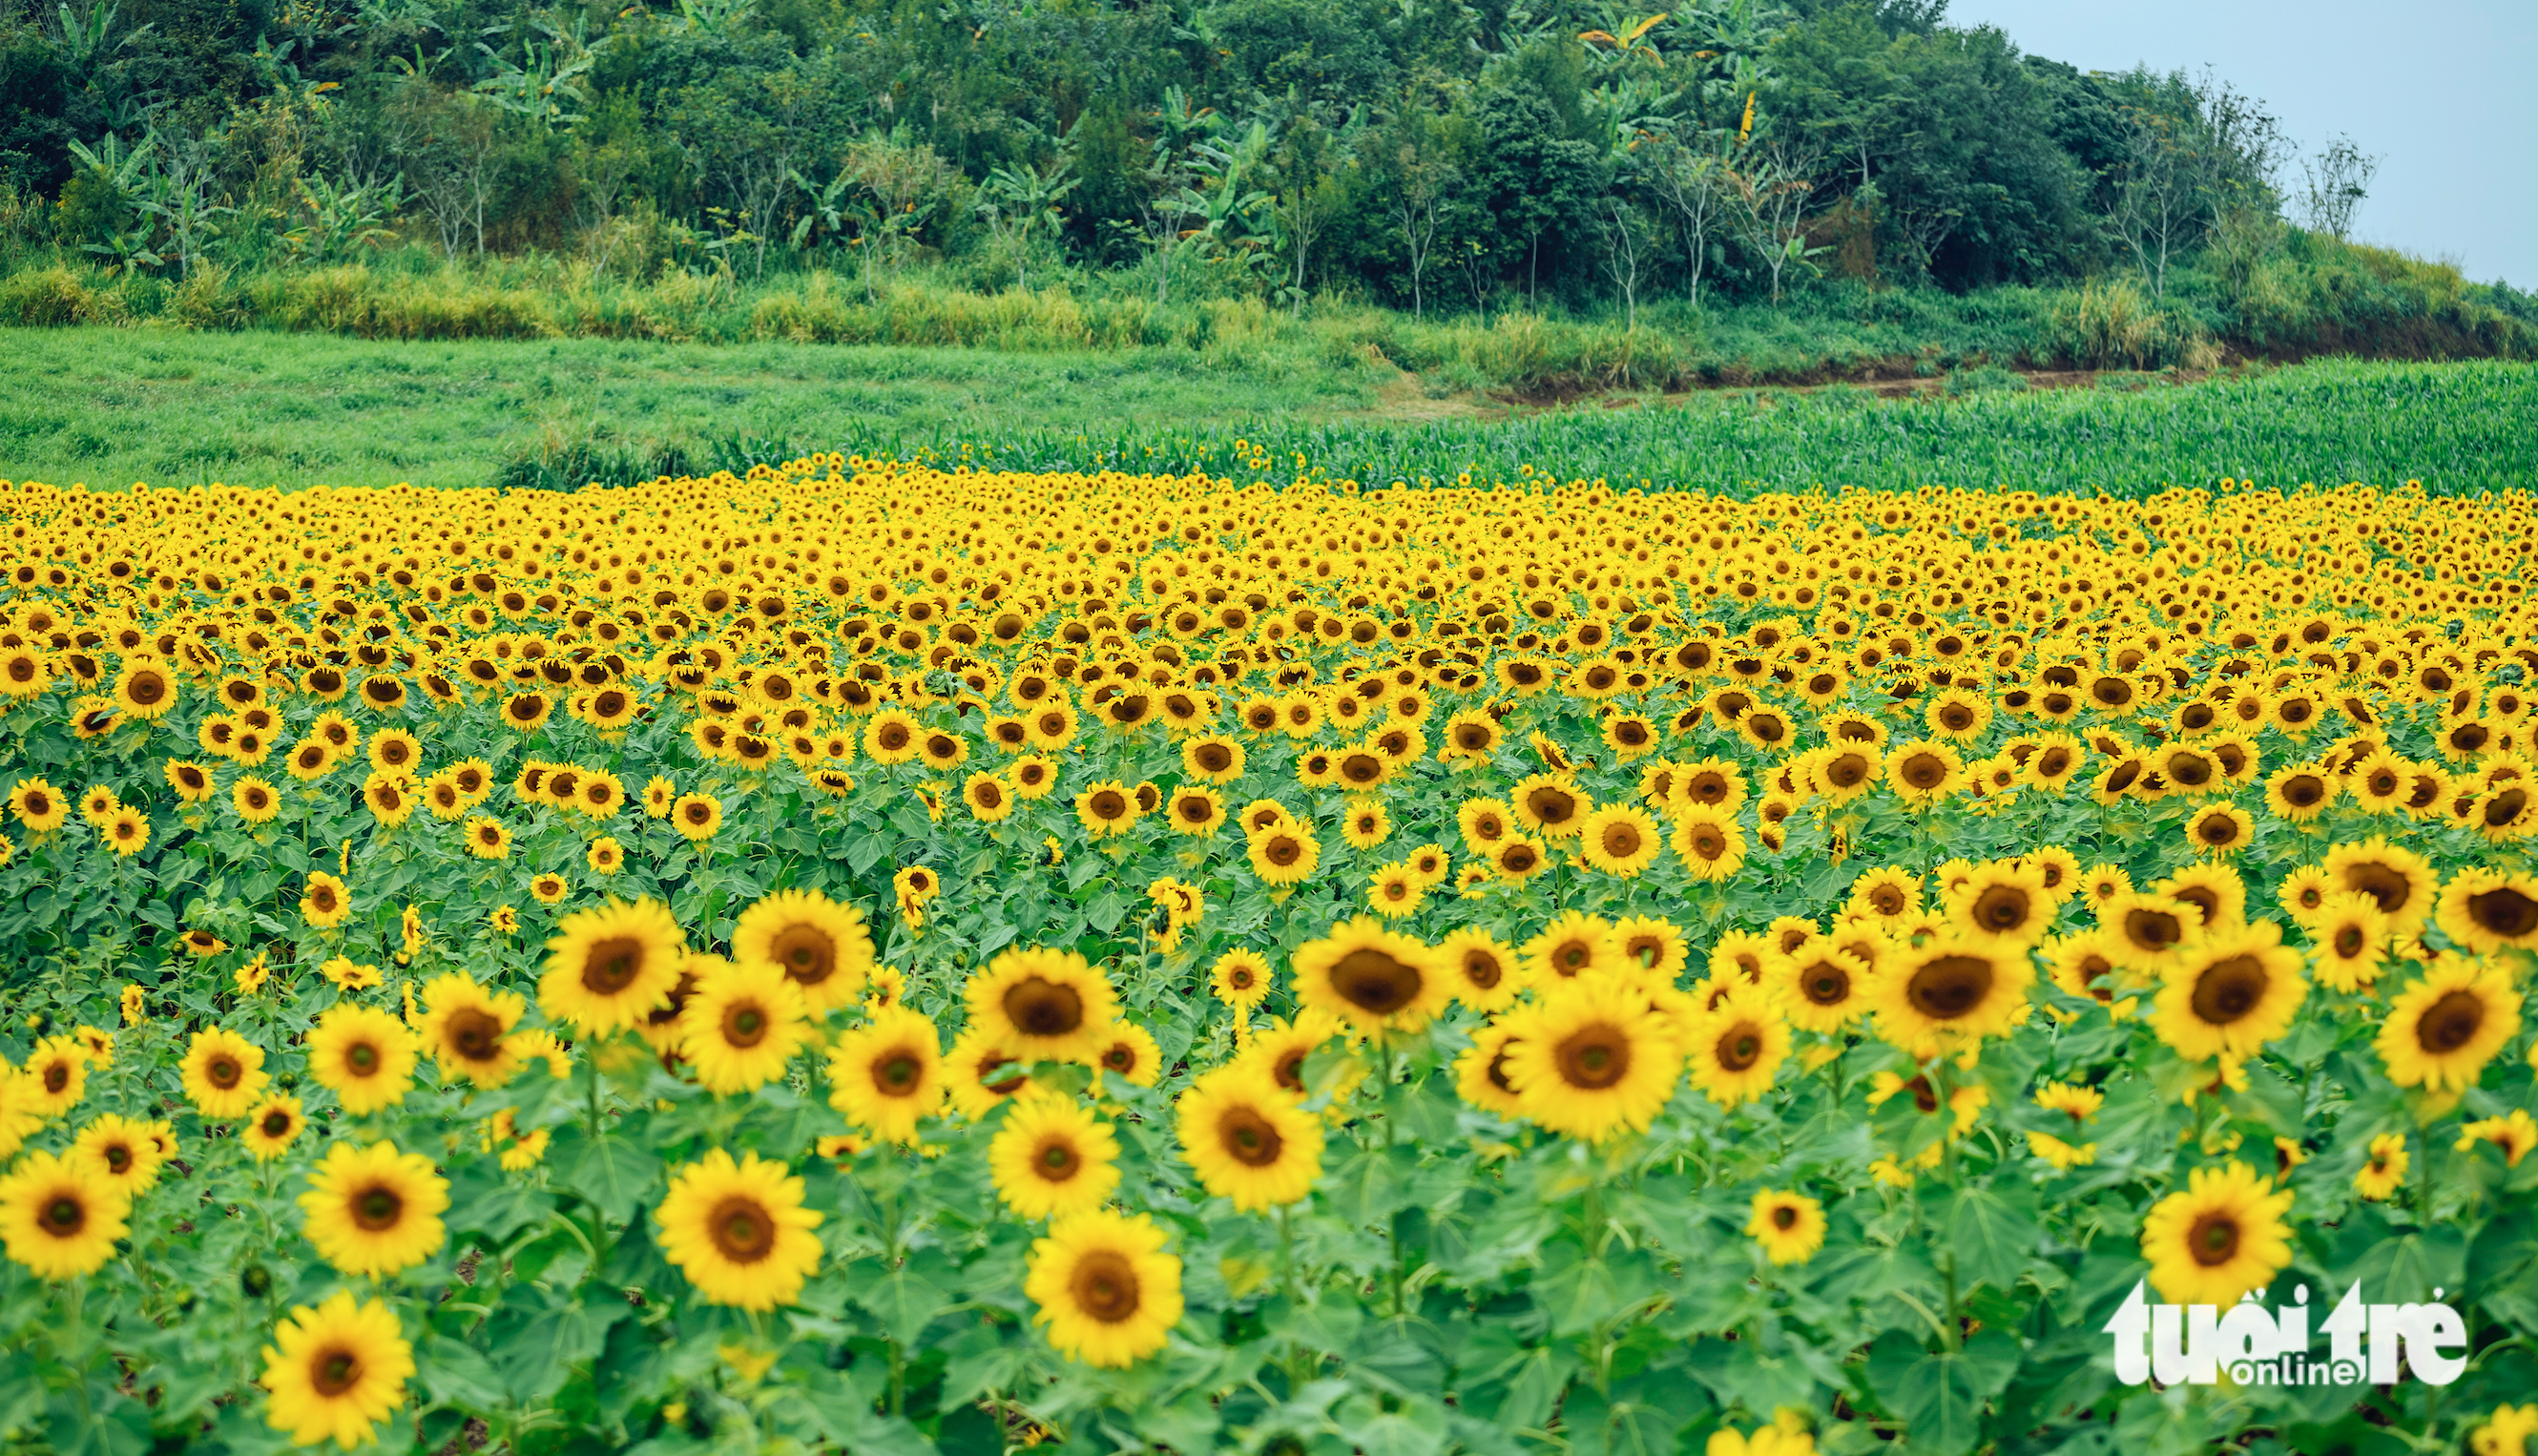 Sunflower field attracts visitors over New Year weekend in north-central Vietnam